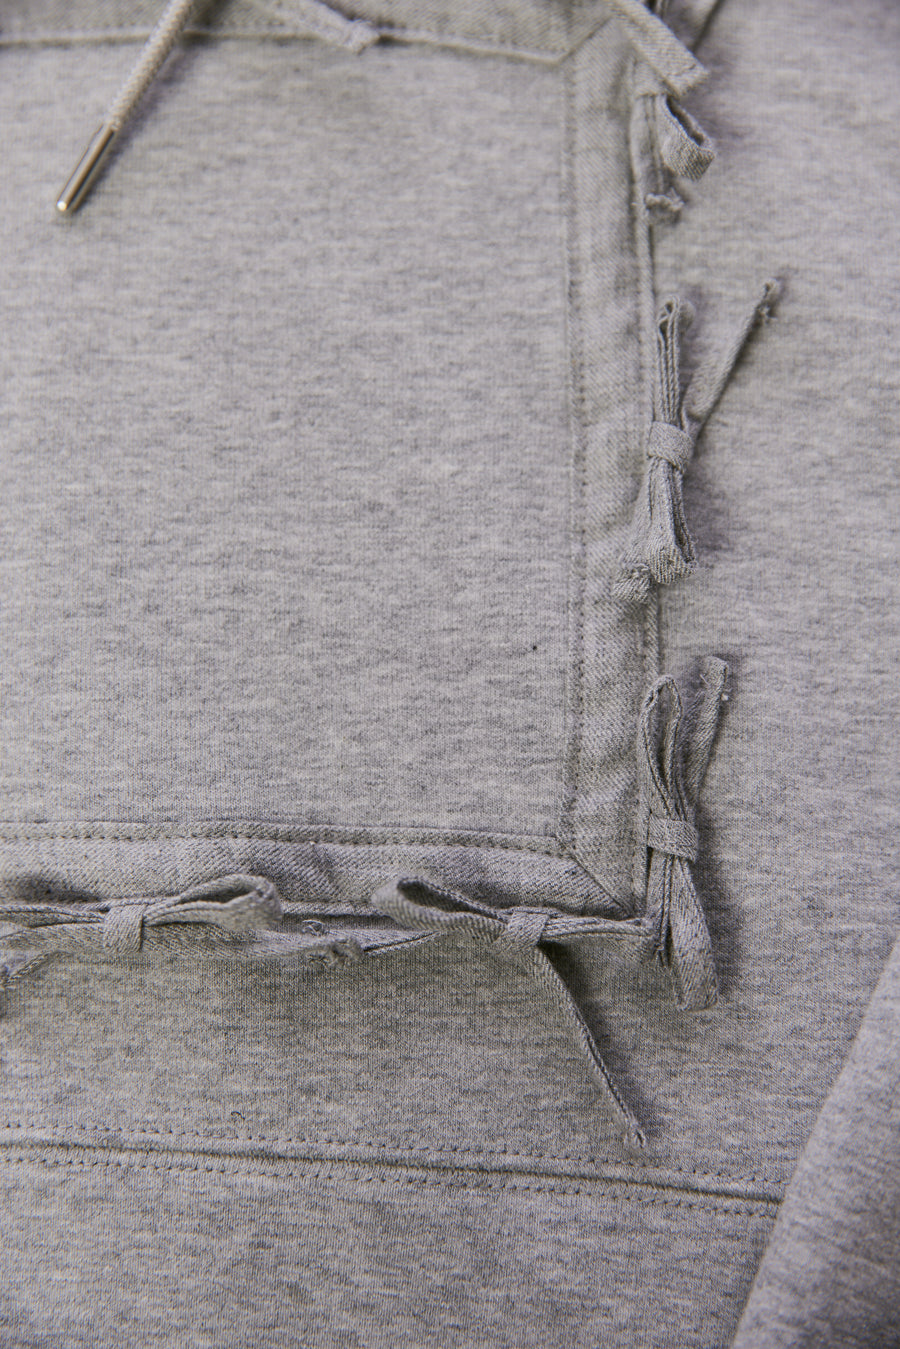 Logo Hoodie with Ribbons - GREY